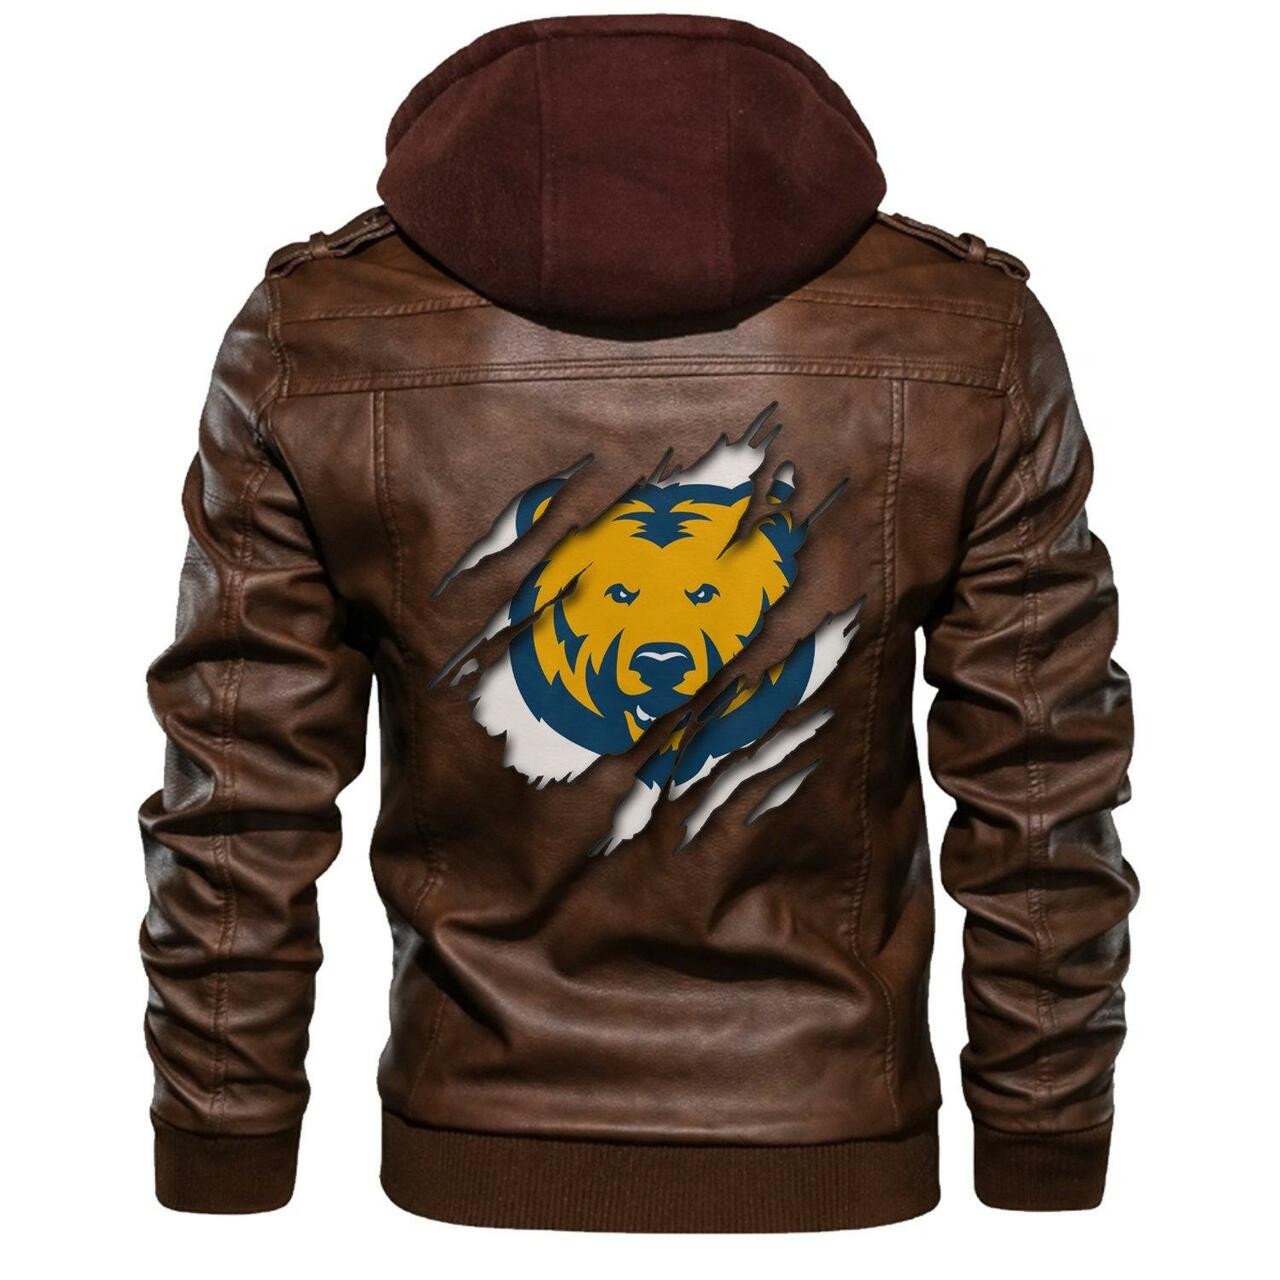 You'll get the best Leather Jacket by shopping online 178